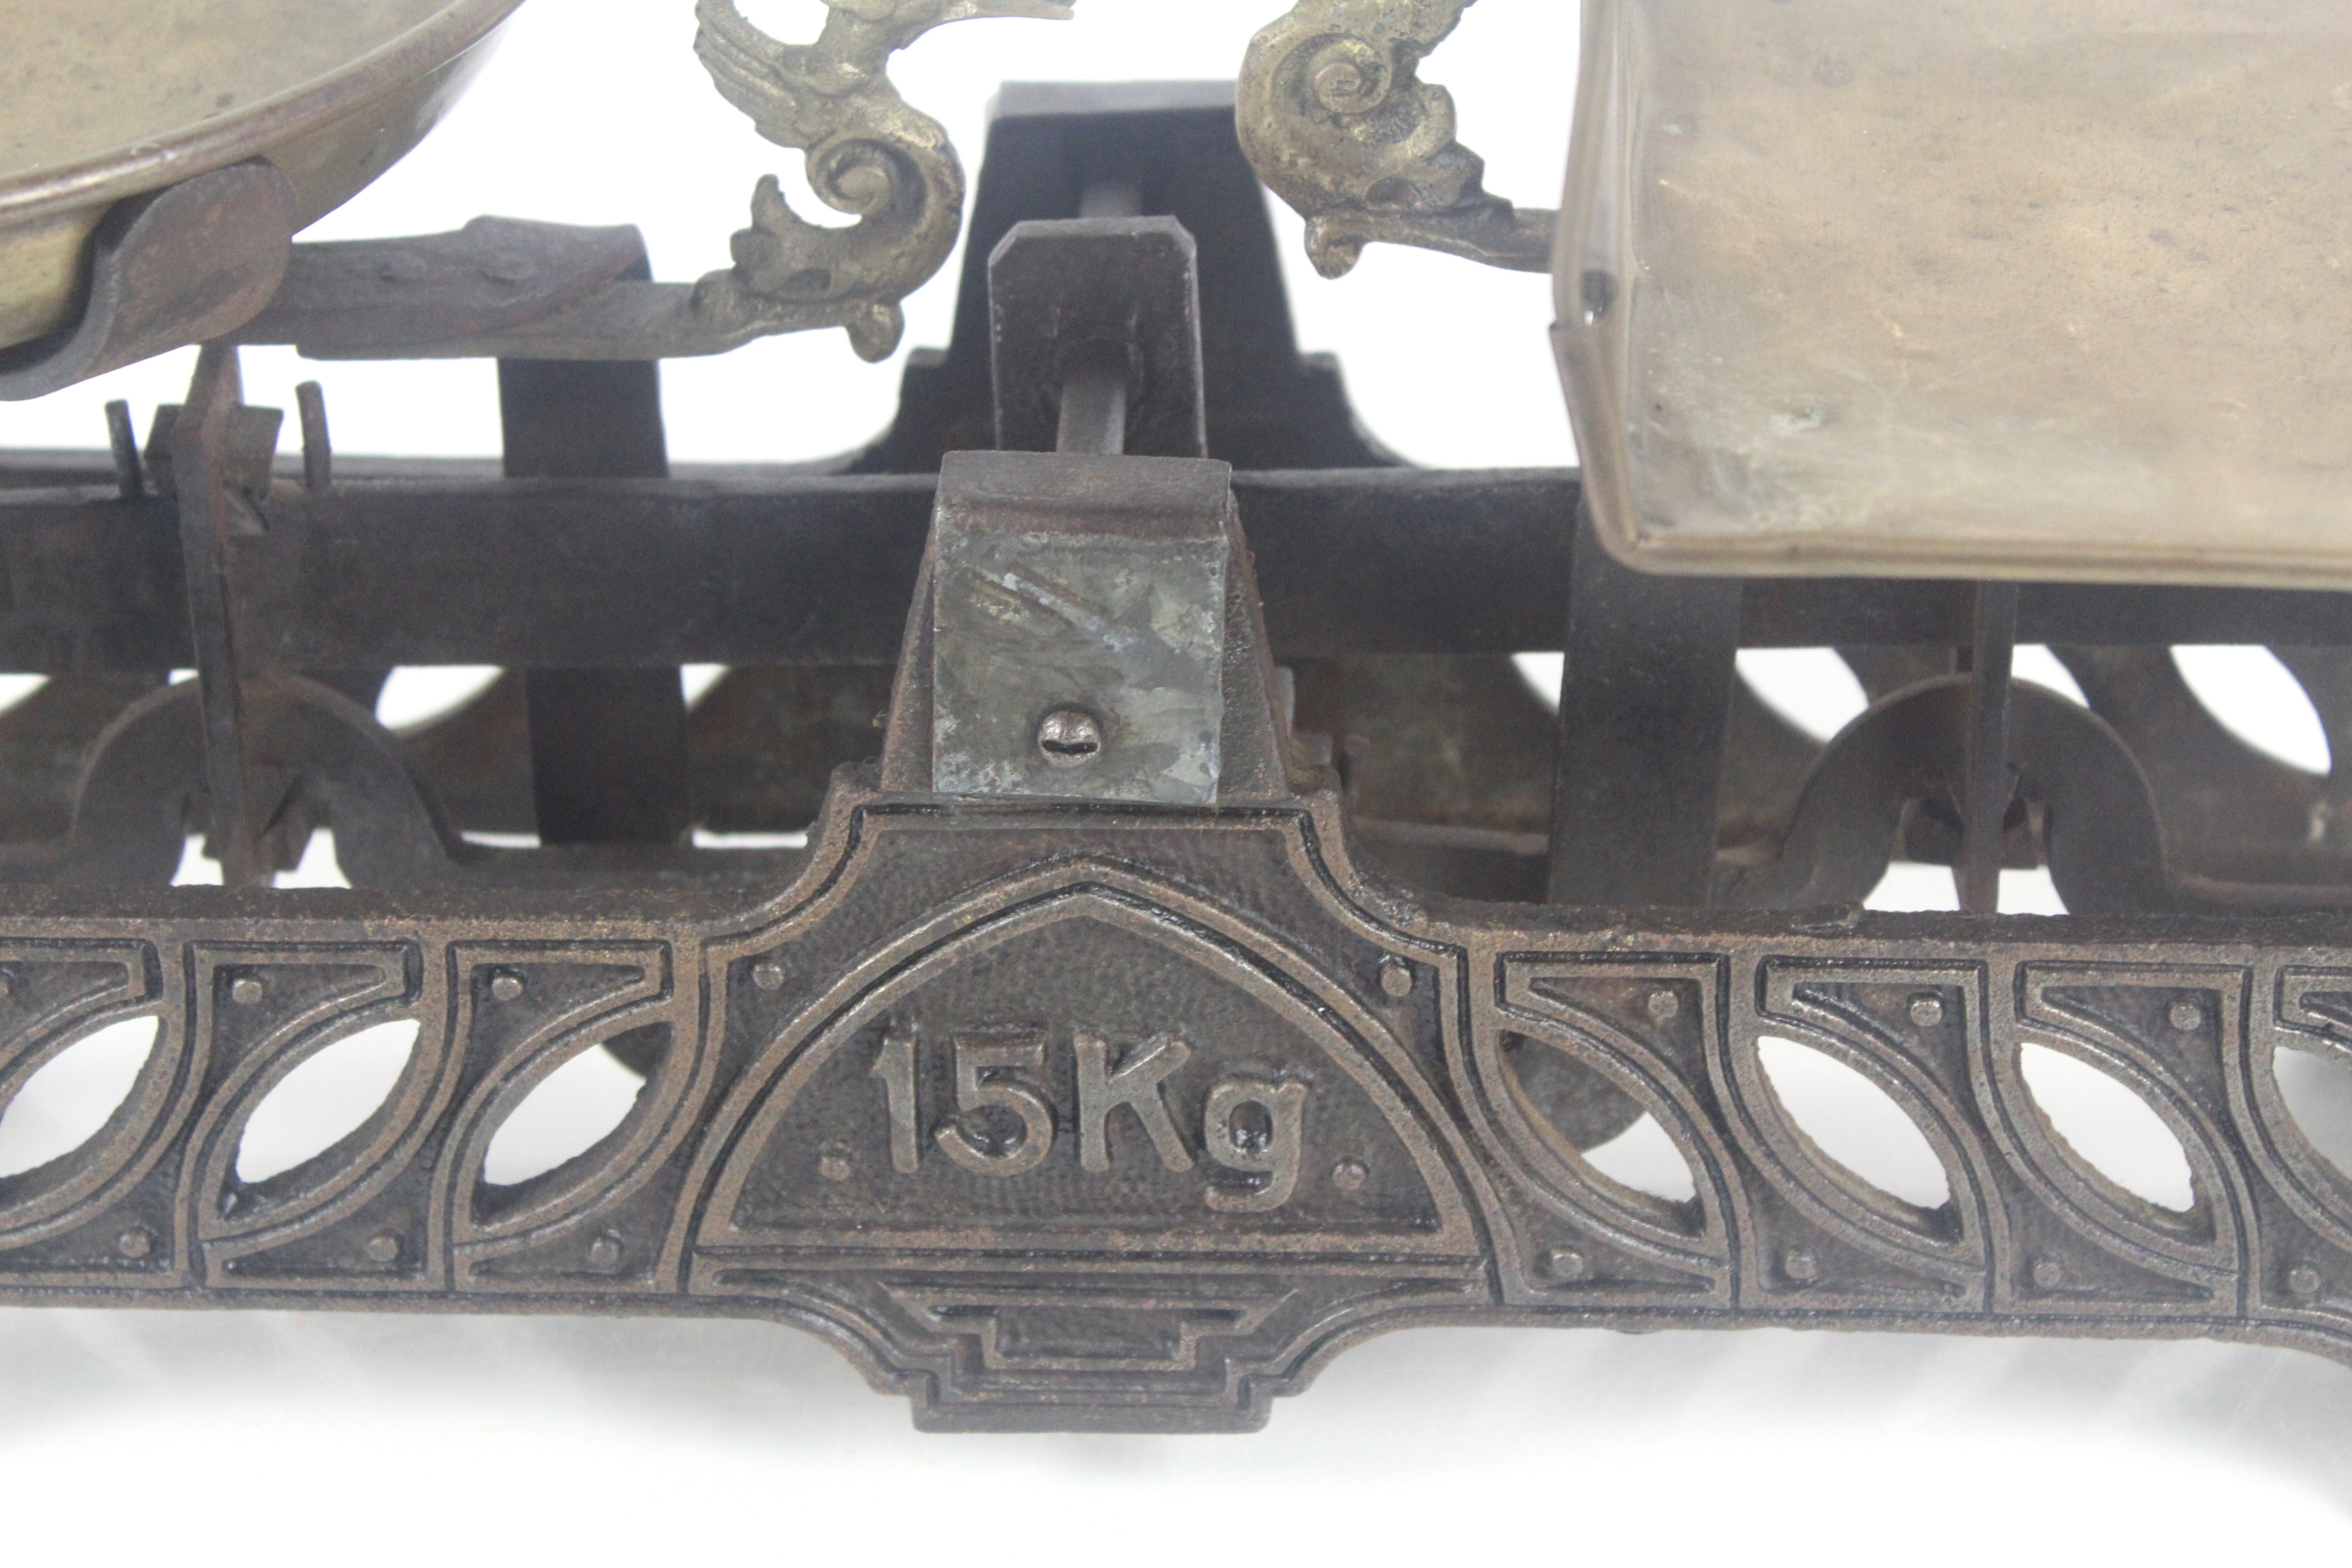 A set of vintage 15kg shop scales with brass pans - Image 11 of 15